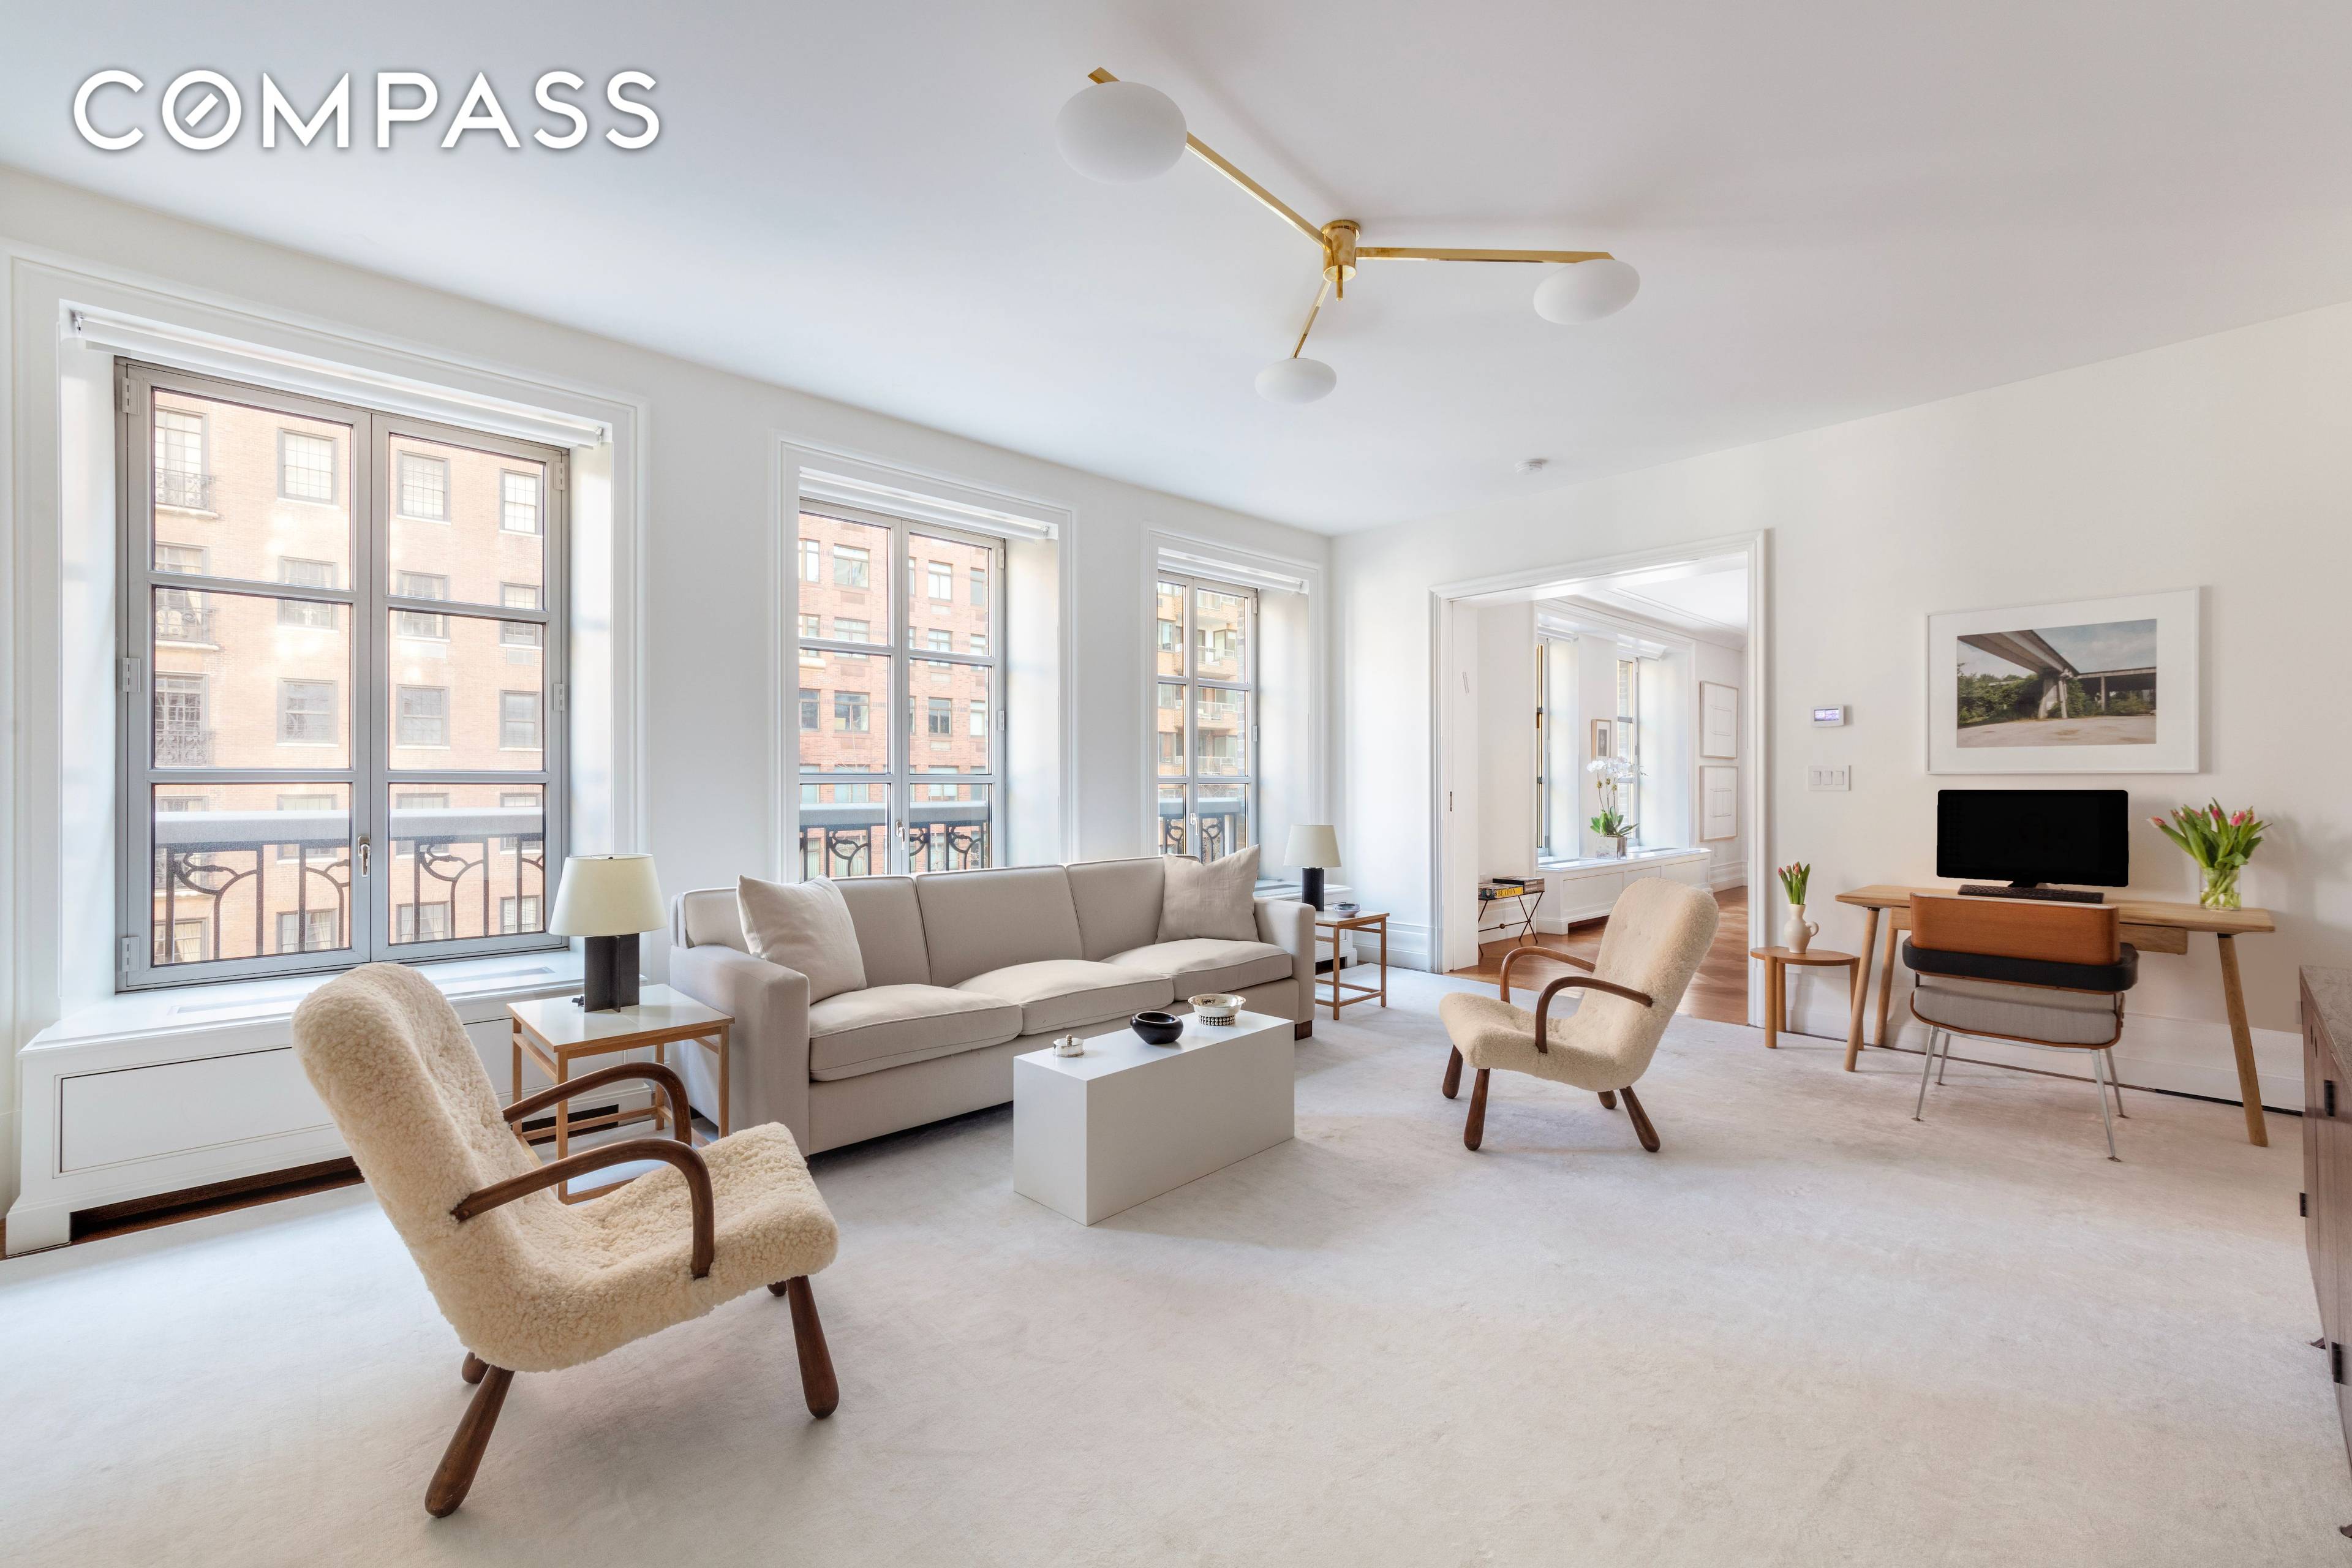 Considered one of the best floorplates in the building, apartment 5W is being offered for the first time at 135 East 79th Street.